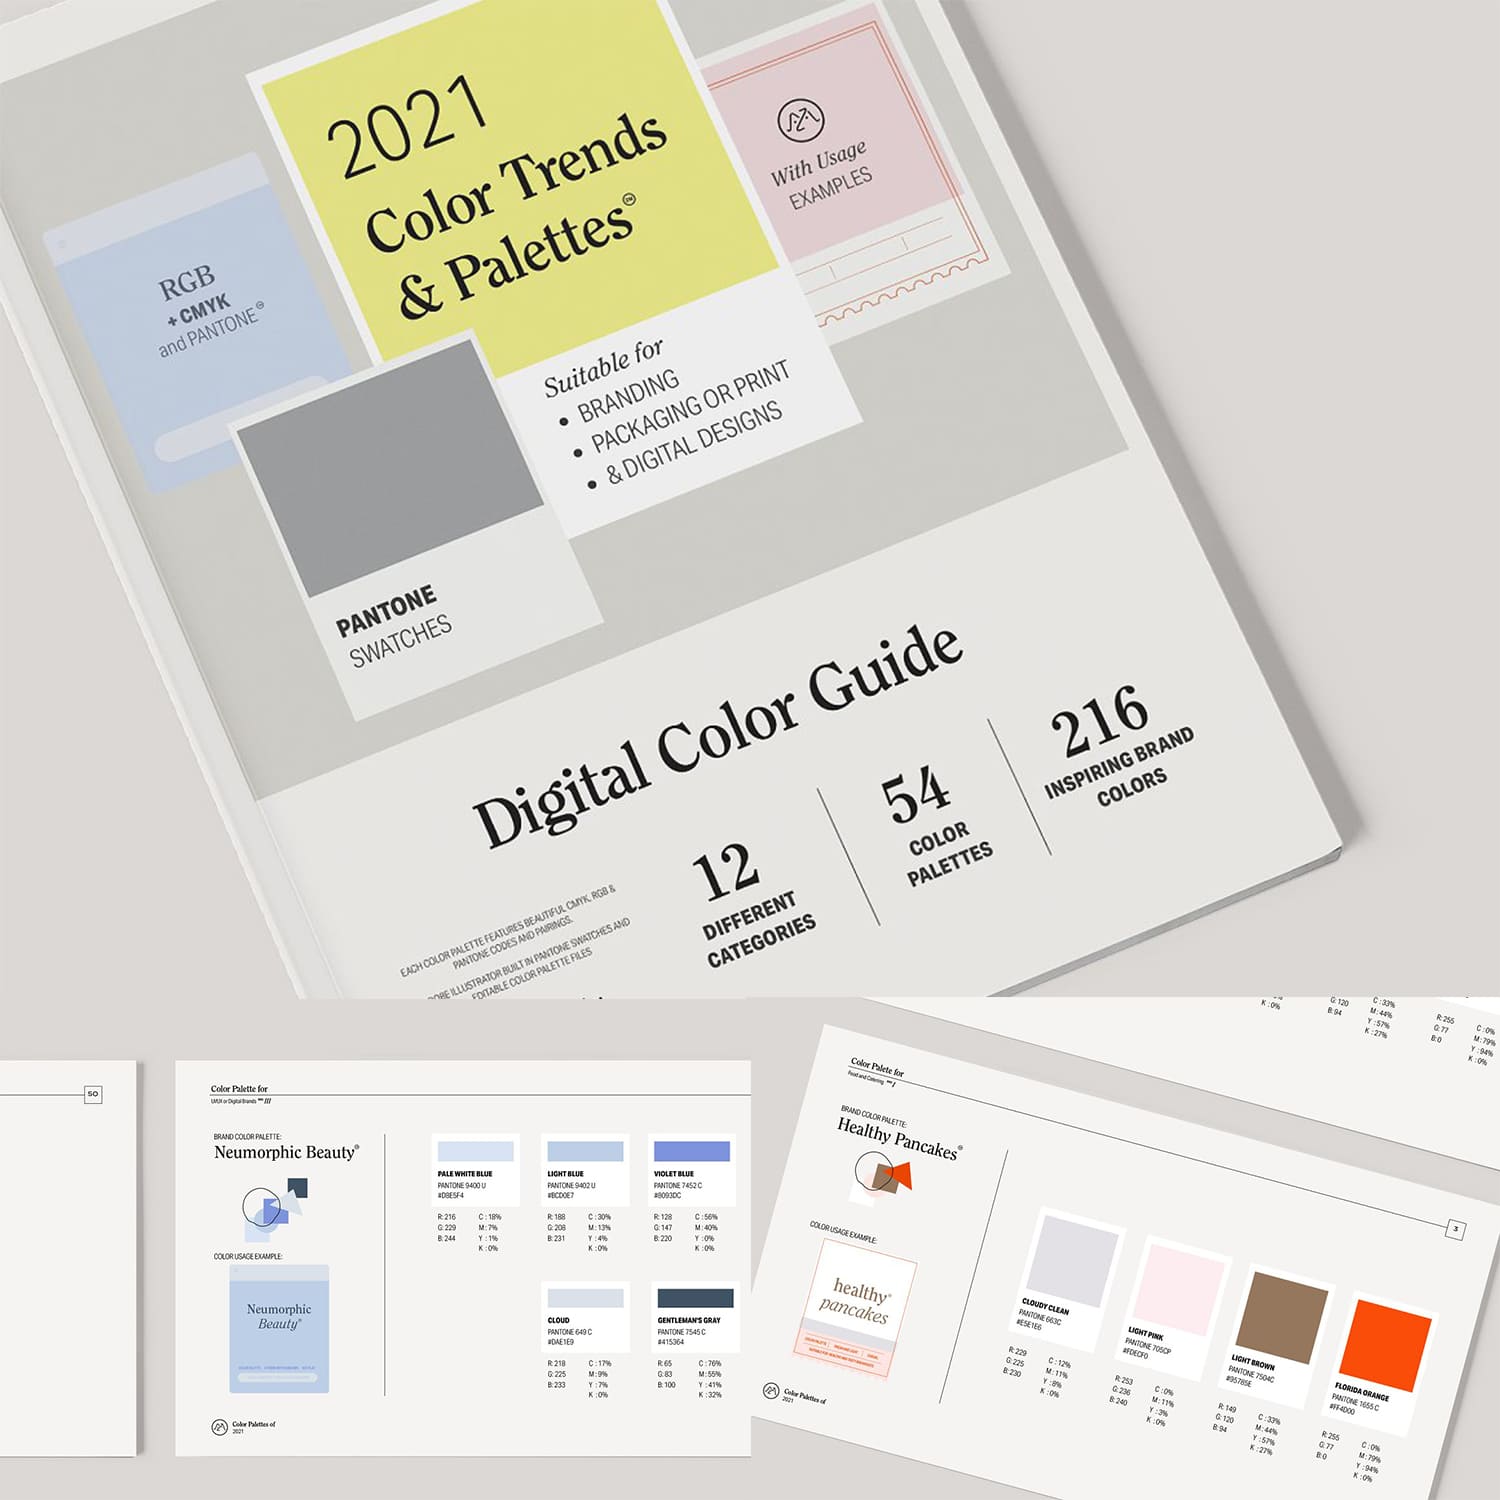 2021Color Palettes and Color Trends preview image.